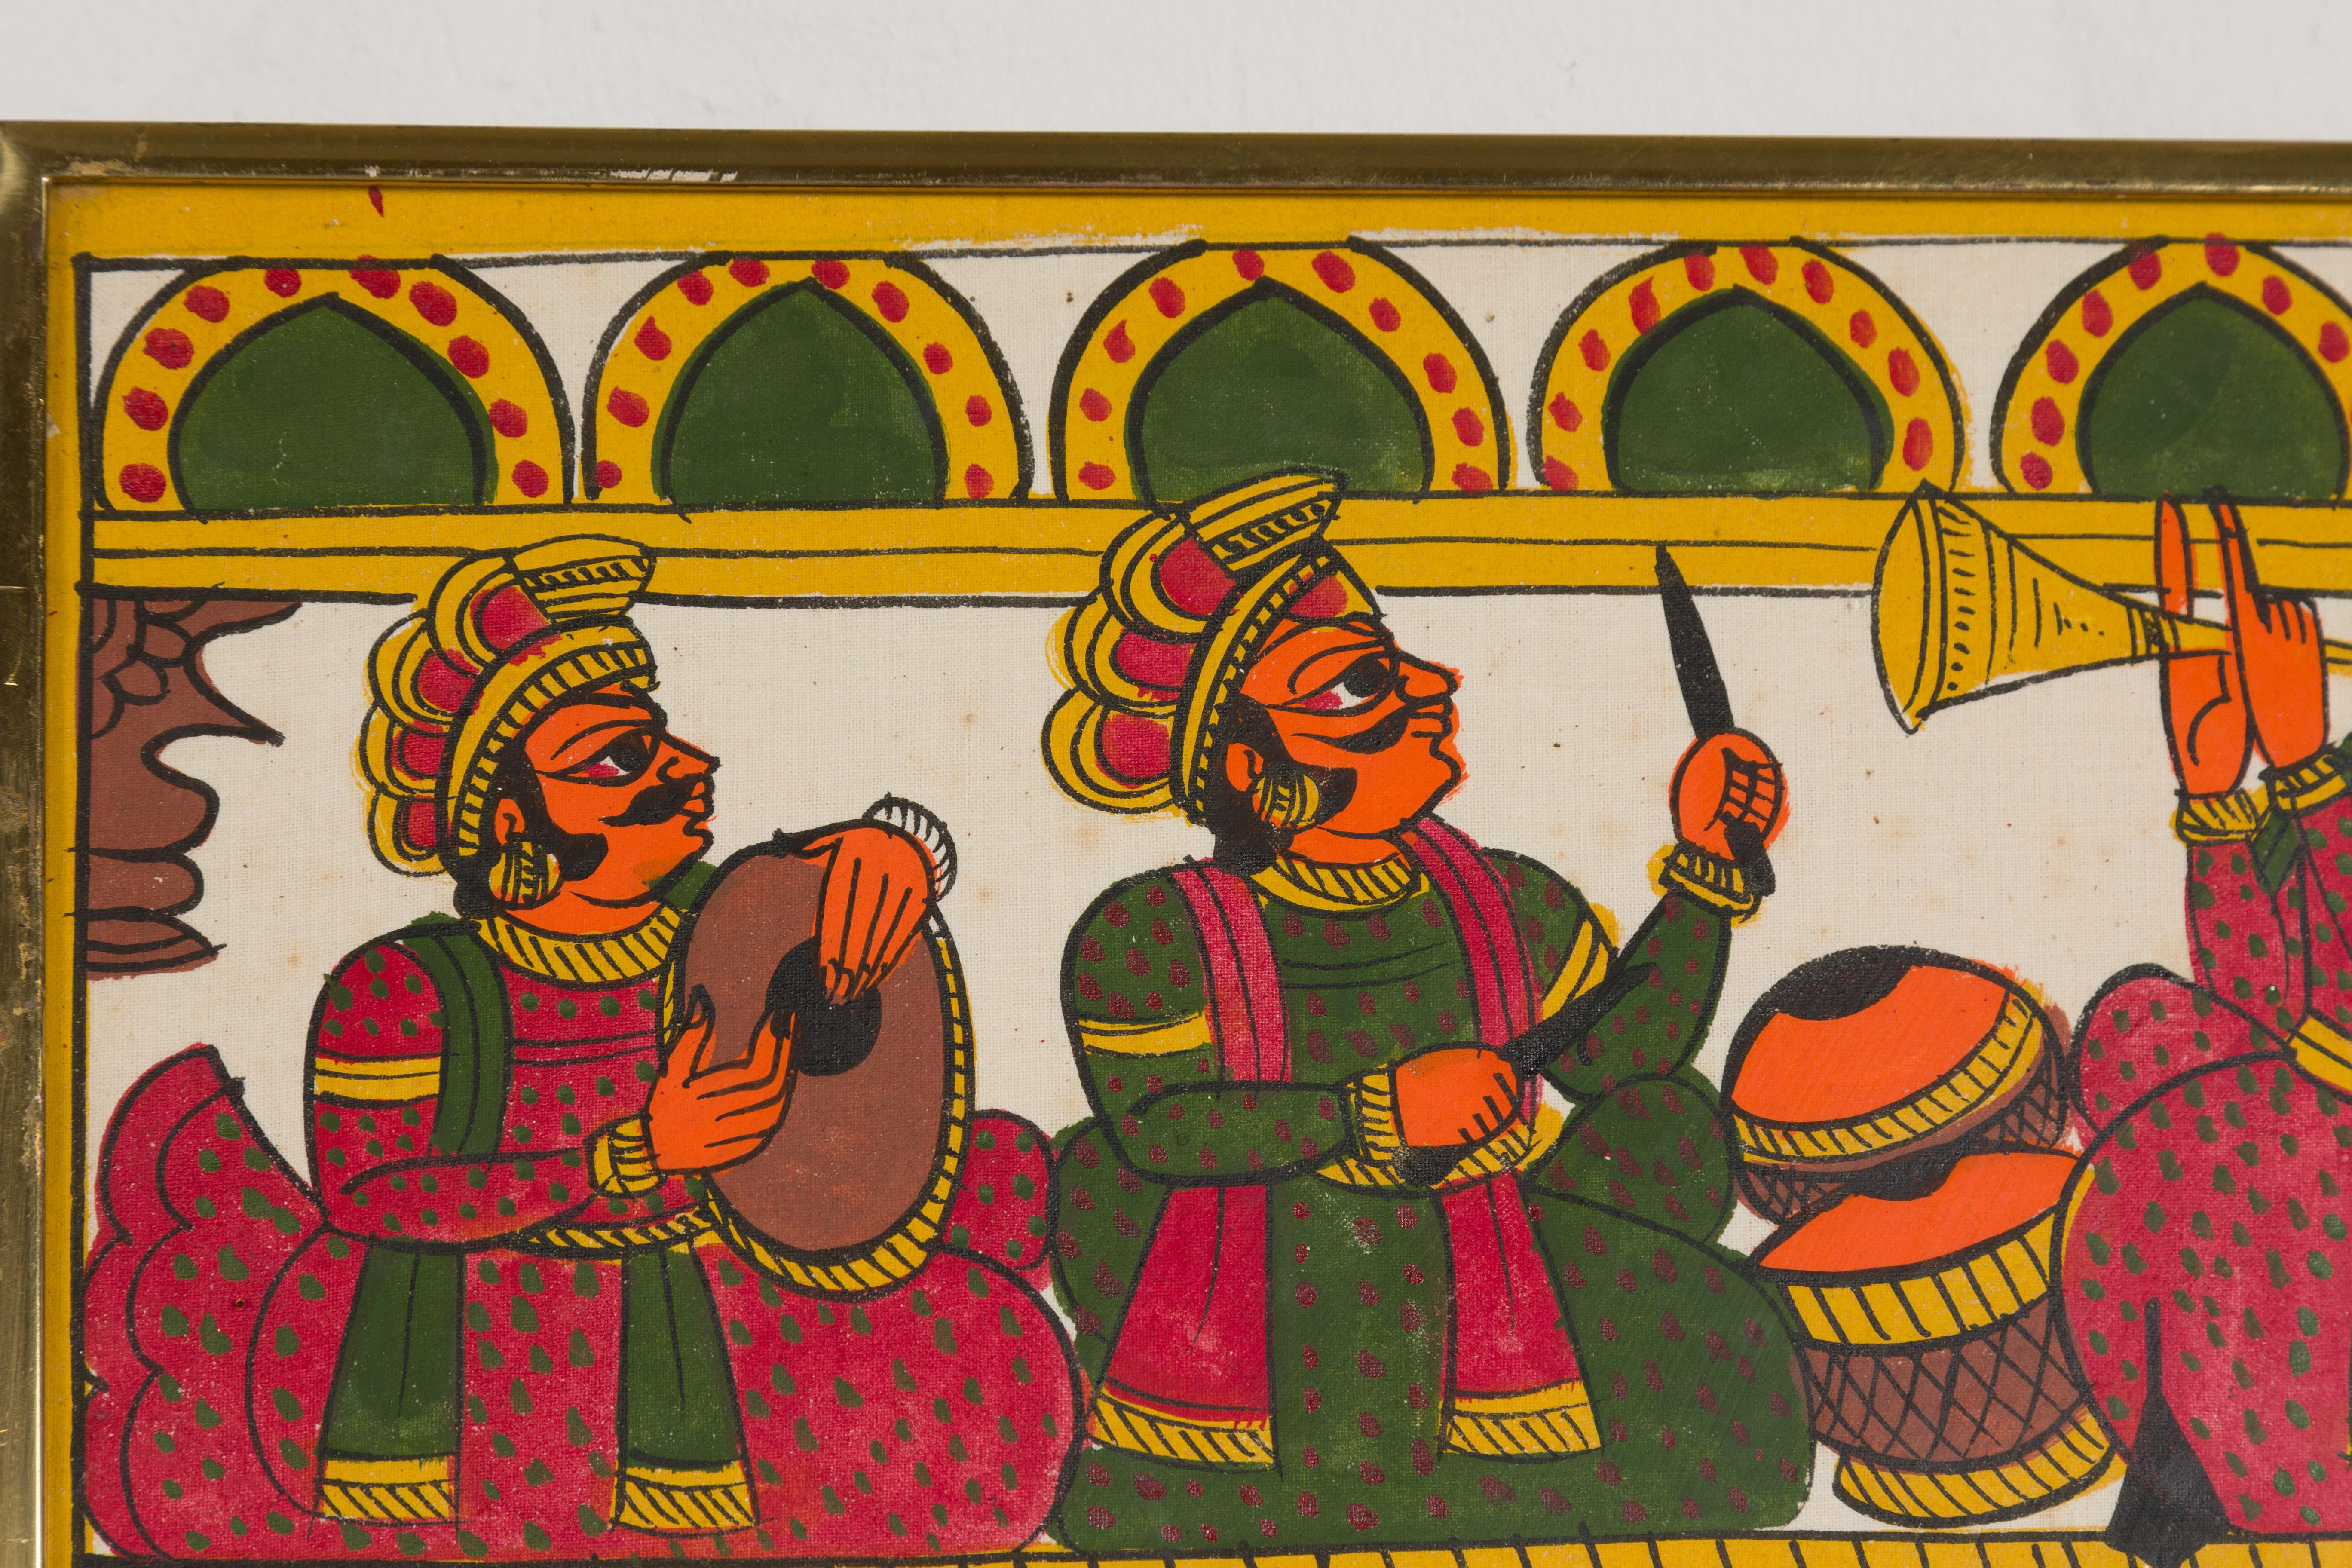 Antique Hand Painted Indian Folk Art Painting Depicting Musicians and Archers For Sale 1